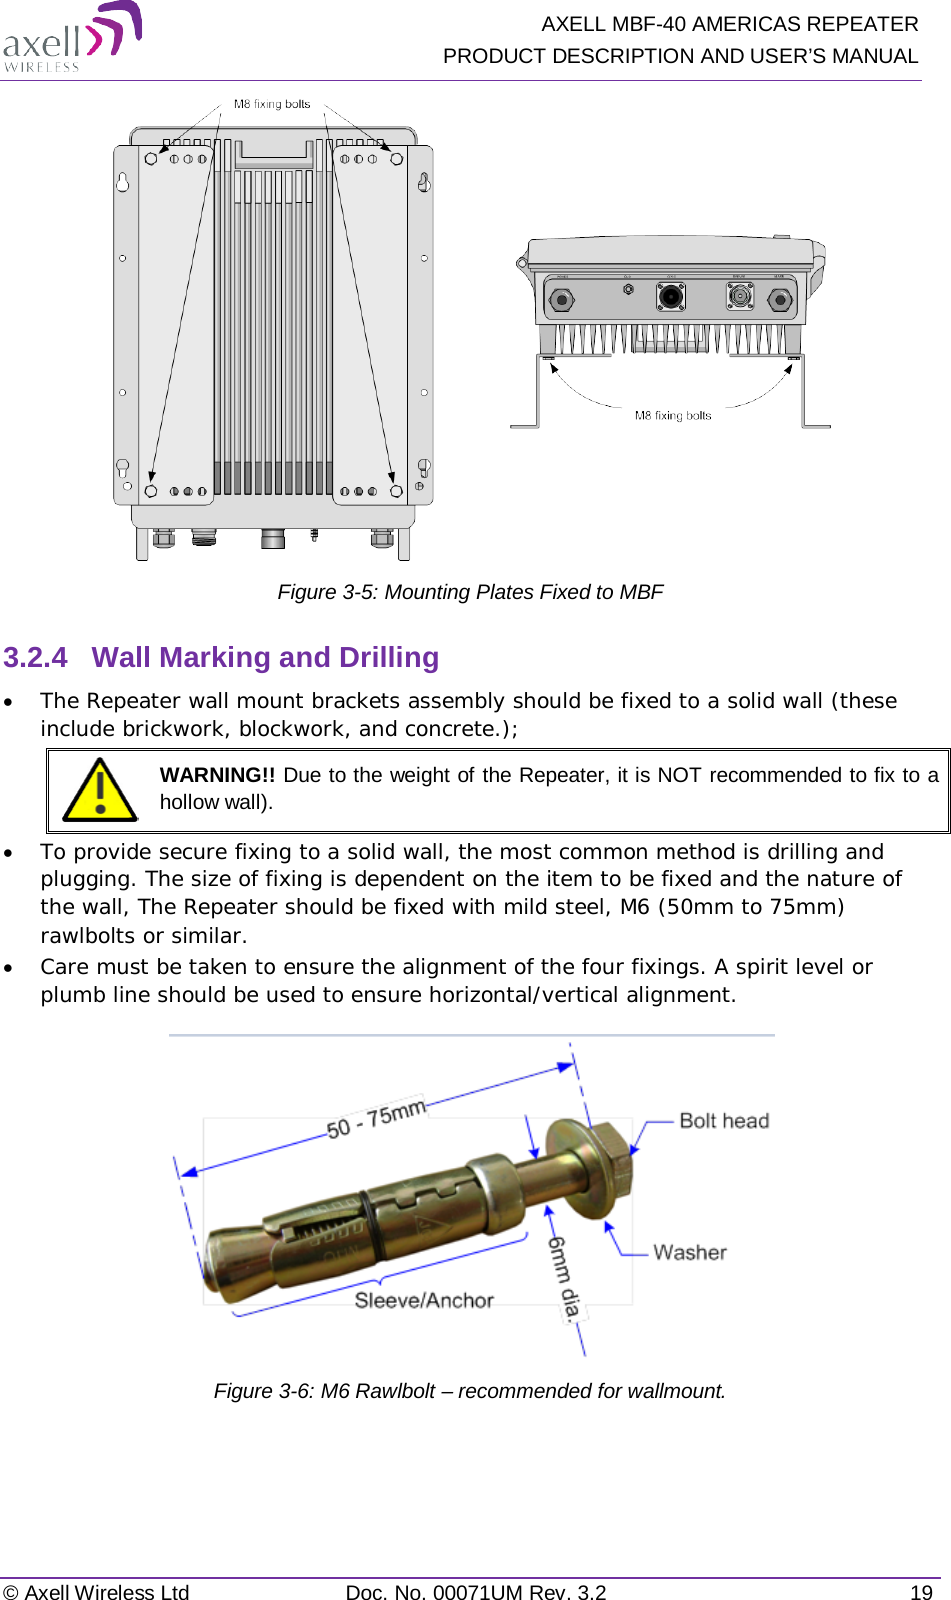   AXELL MBF-40 AMERICAS REPEATER PRODUCT DESCRIPTION AND USER’S MANUAL © Axell Wireless Ltd Doc. No. 00071UM Rev. 3.2 19  Figure  3-5: Mounting Plates Fixed to MBF 3.2.4  Wall Marking and Drilling • The Repeater wall mount brackets assembly should be fixed to a solid wall (these include brickwork, blockwork, and concrete.);   WARNING!! Due to the weight of the Repeater, it is NOT recommended to fix to a hollow wall). • To provide secure fixing to a solid wall, the most common method is drilling and plugging. The size of fixing is dependent on the item to be fixed and the nature of the wall, The Repeater should be fixed with mild steel, M6 (50mm to 75mm) rawlbolts or similar. • Care must be taken to ensure the alignment of the four fixings. A spirit level or plumb line should be used to ensure horizontal/vertical alignment.  Figure  3-6: M6 Rawlbolt – recommended for wallmount.   